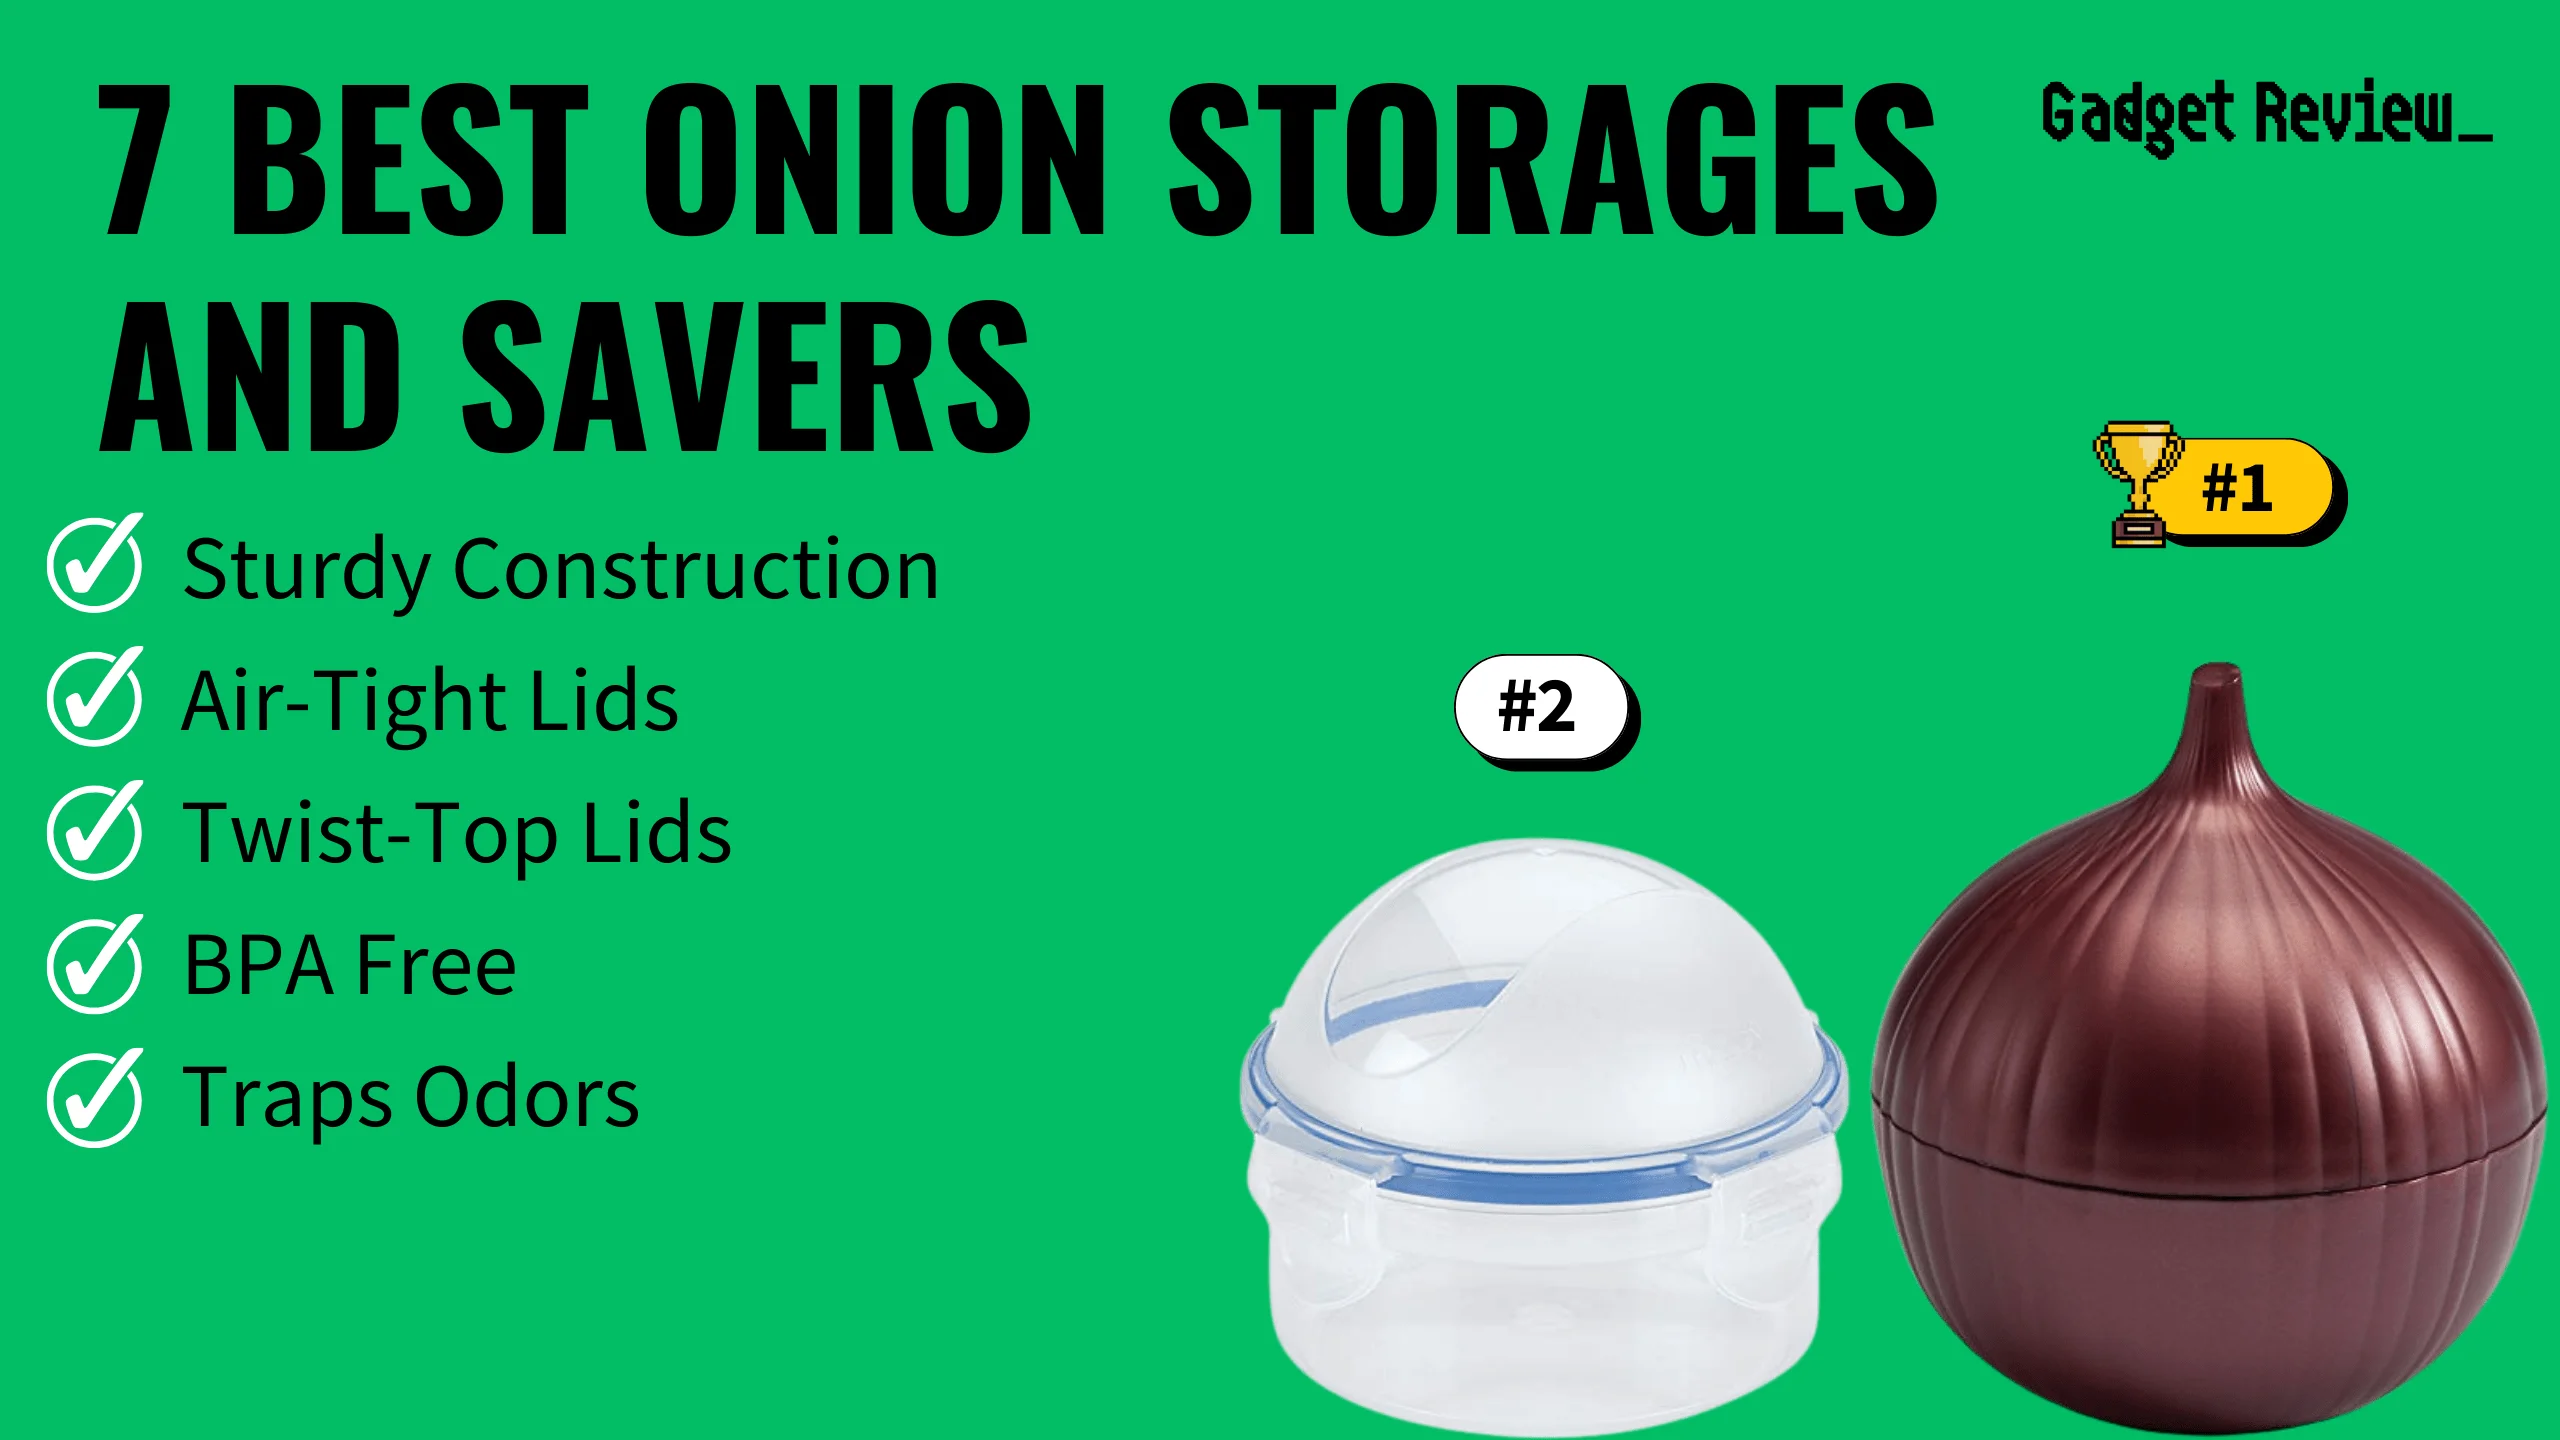 best onion storages savers featured image that shows the top three best kitchen product models